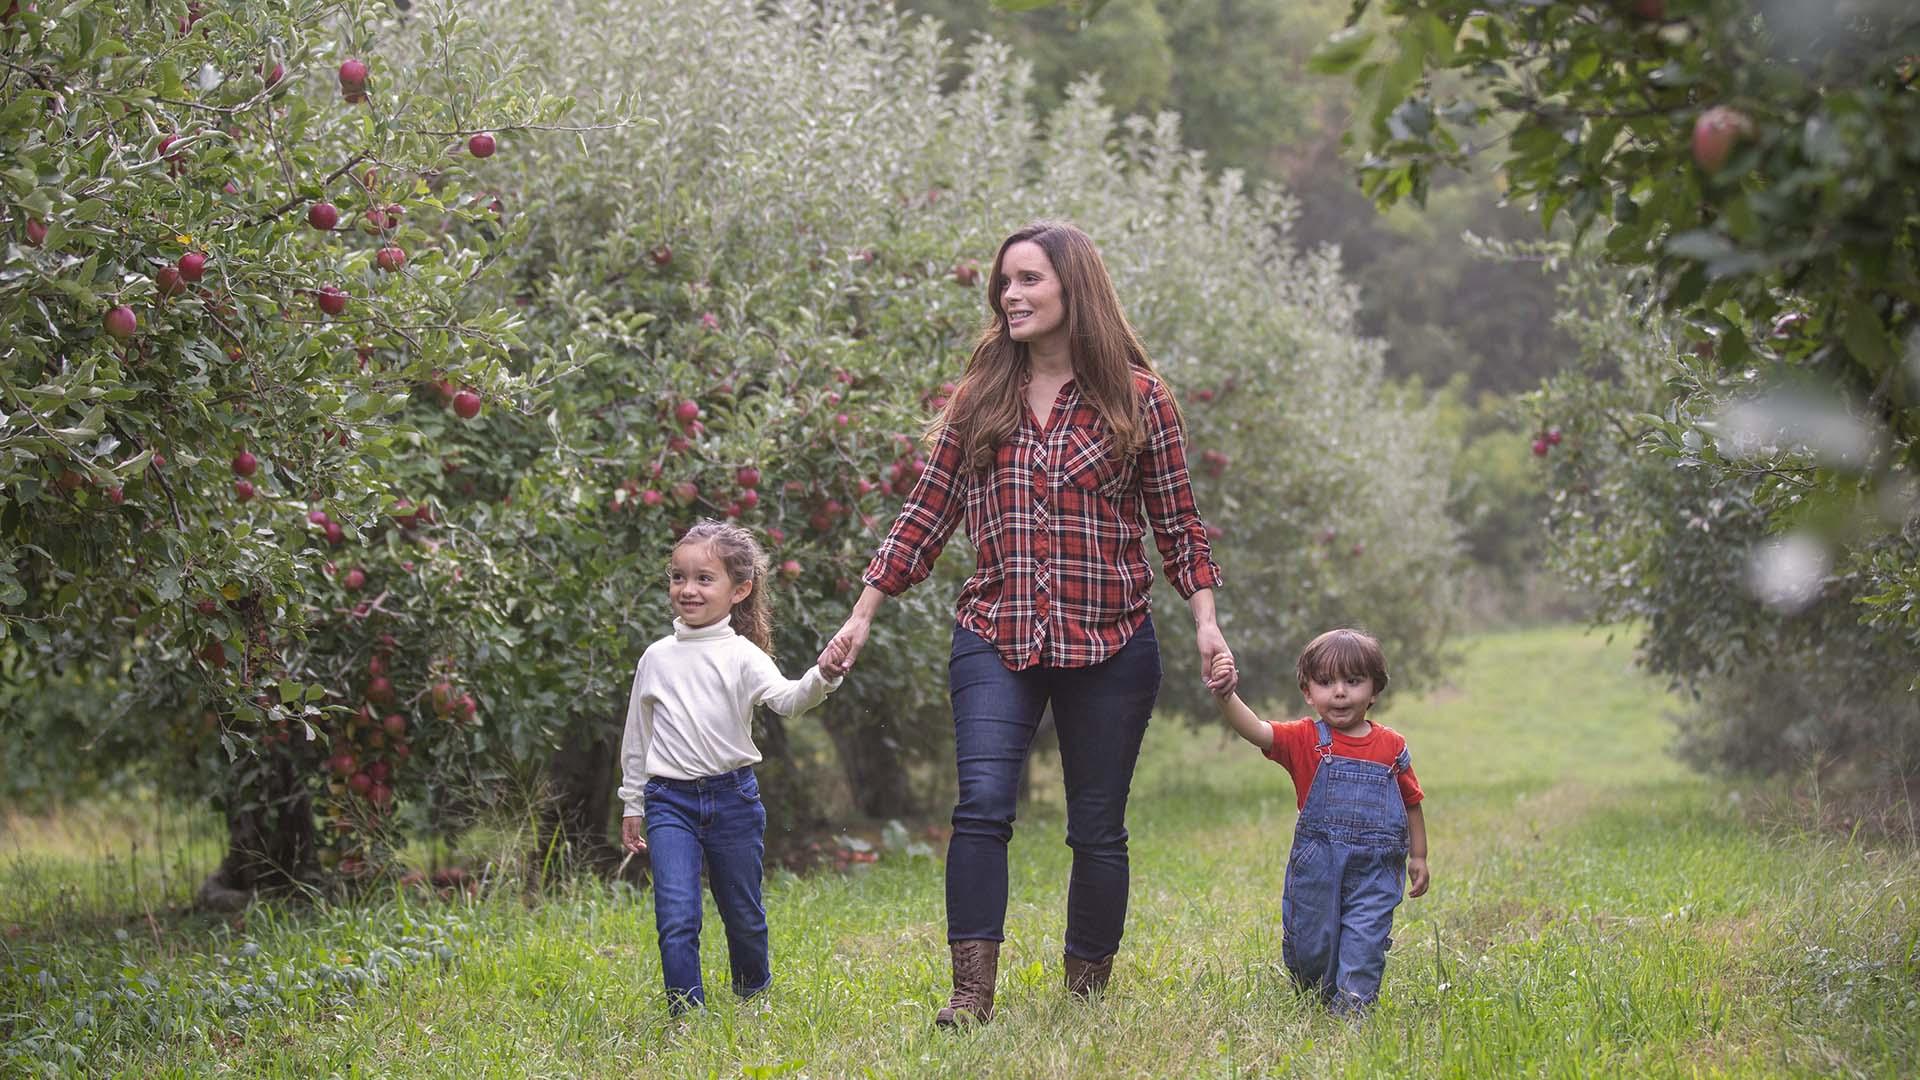 An adult and two children walking in an orchard.